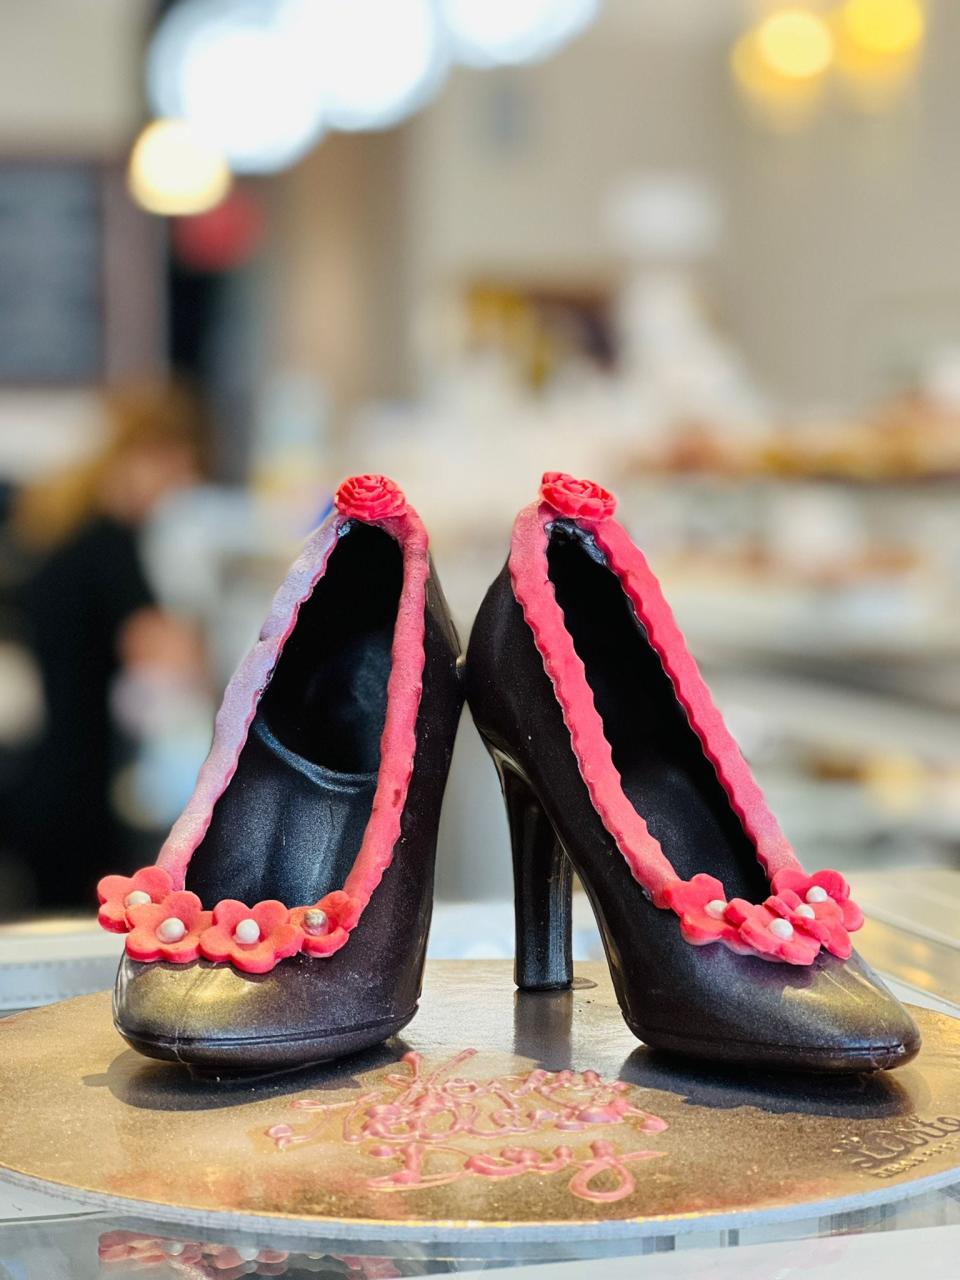 These hand-decorated chocolate shoes are available for Mother's Day at L'Arte in Ramsey.